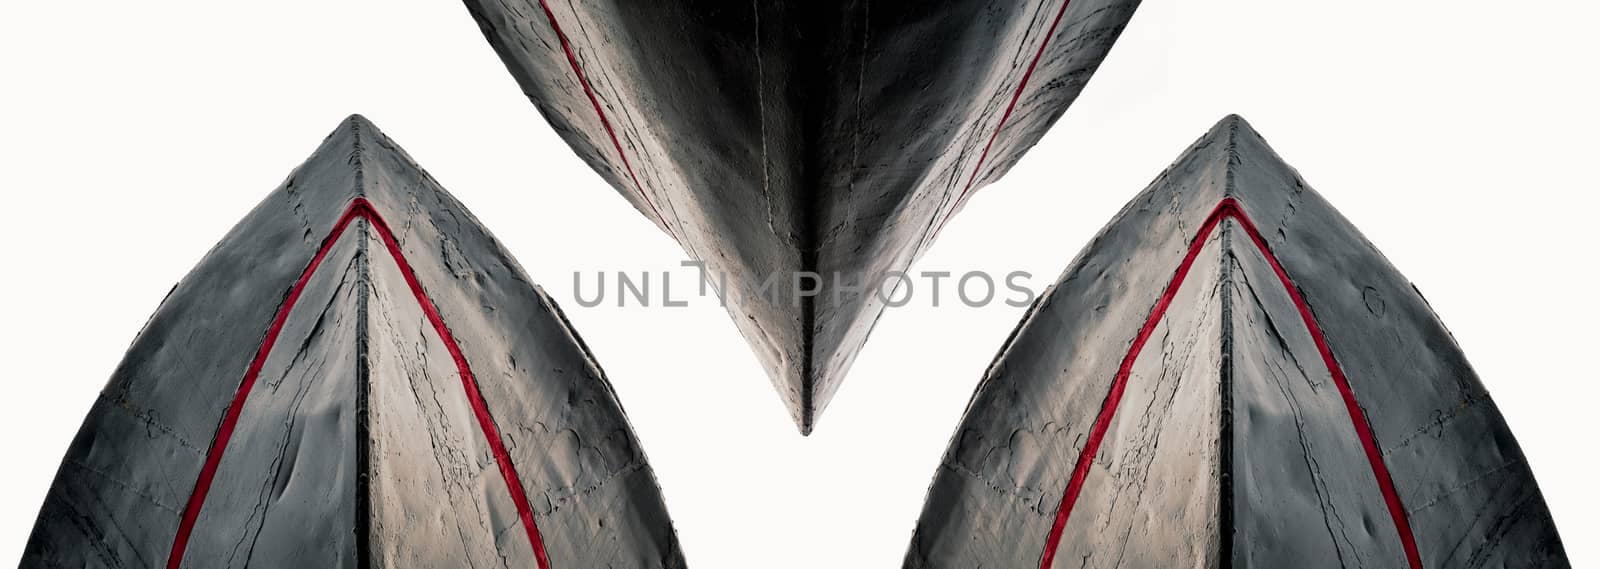 fragment of an old ship on a white background isolated